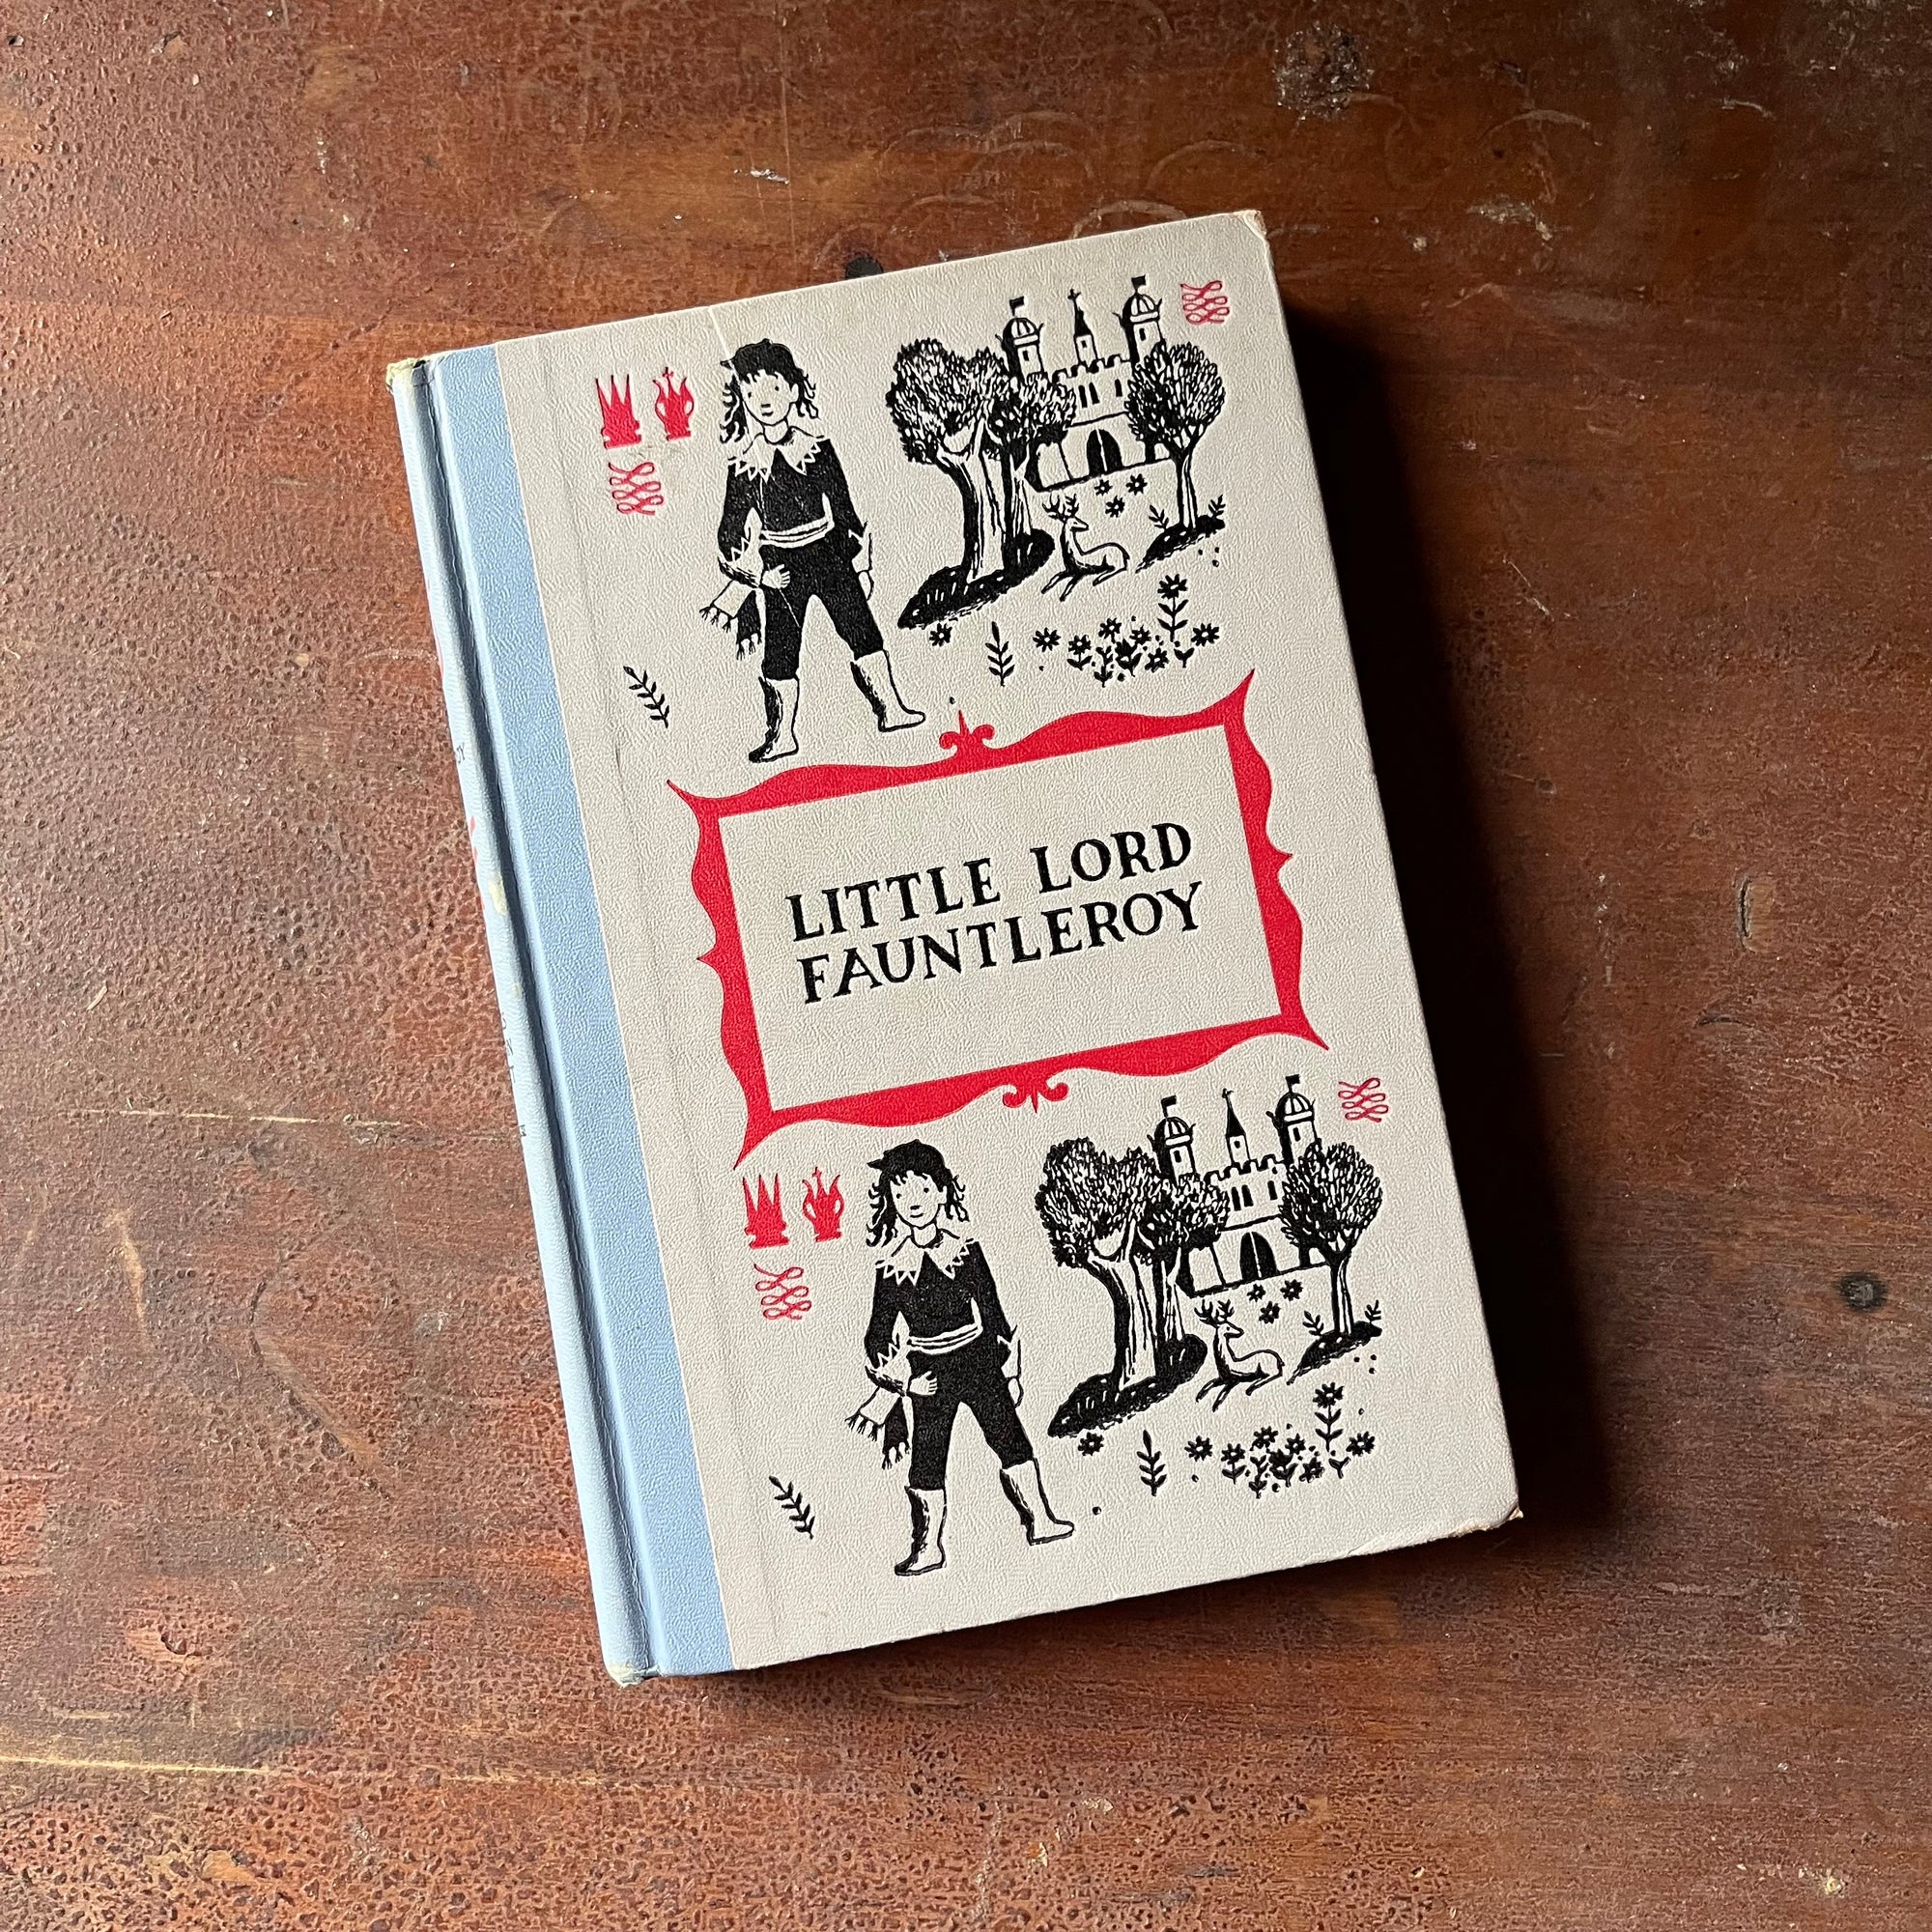 Little Lord Fauntleroy by Frances Hodgson Burnett - a 1954 Junior Deluxe Editions Children's Book - view of the front cover